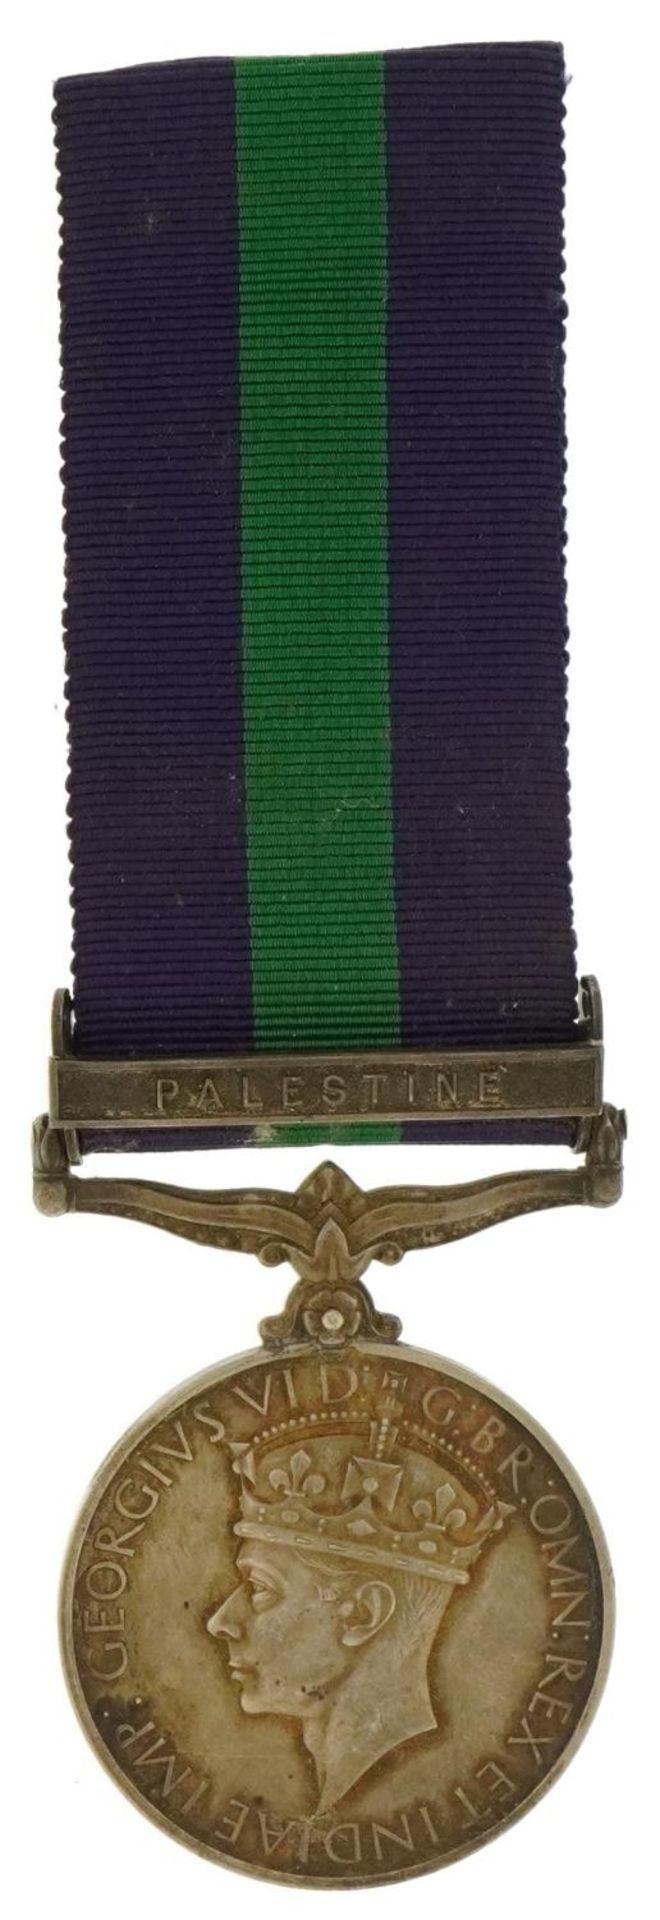 British military World War II General Service medal with Palestine bar awarded to 6396901PTE.J.H. - Image 2 of 4